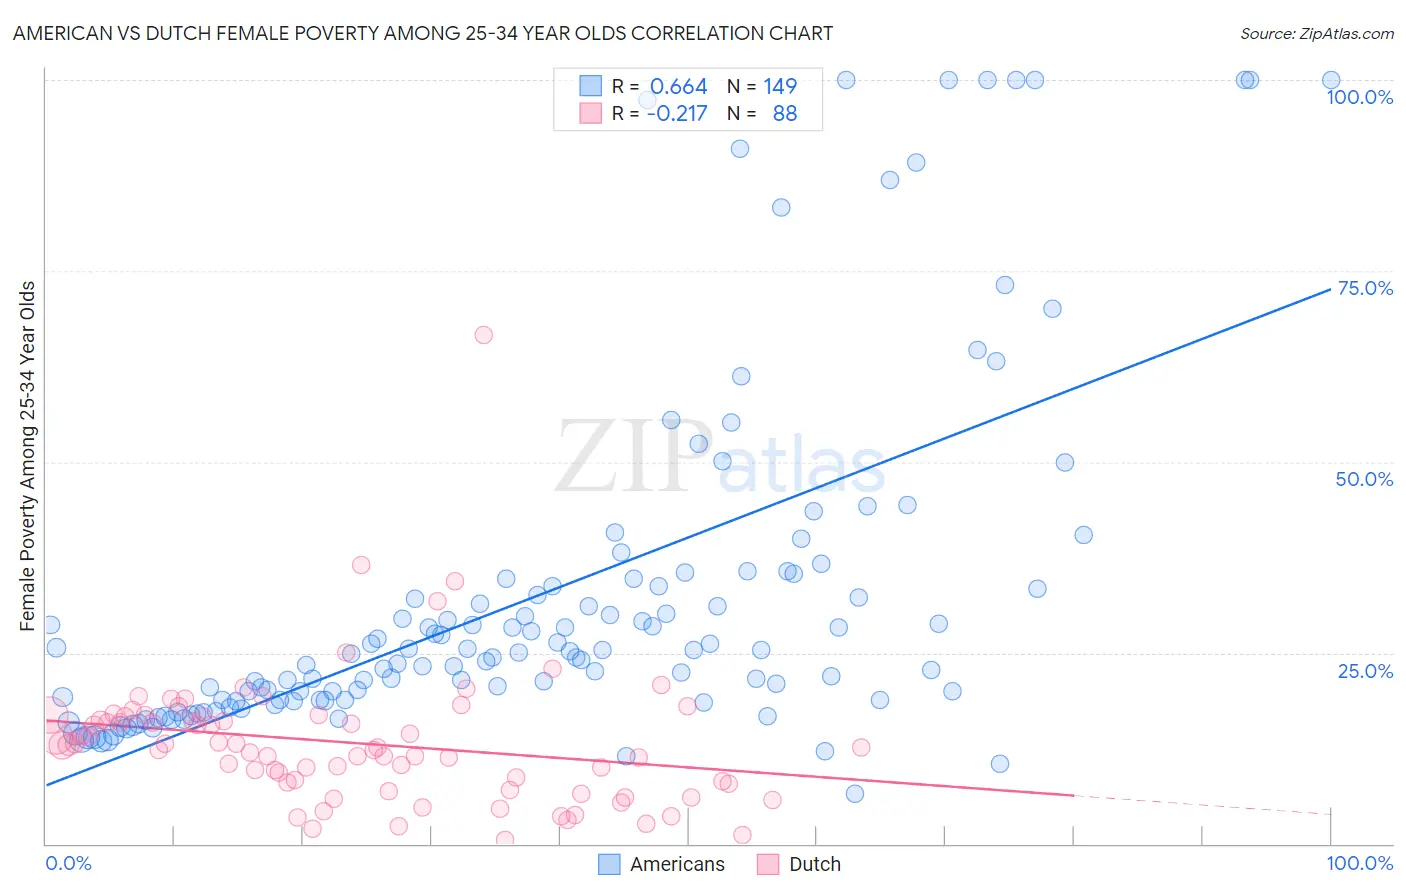 American vs Dutch Female Poverty Among 25-34 Year Olds